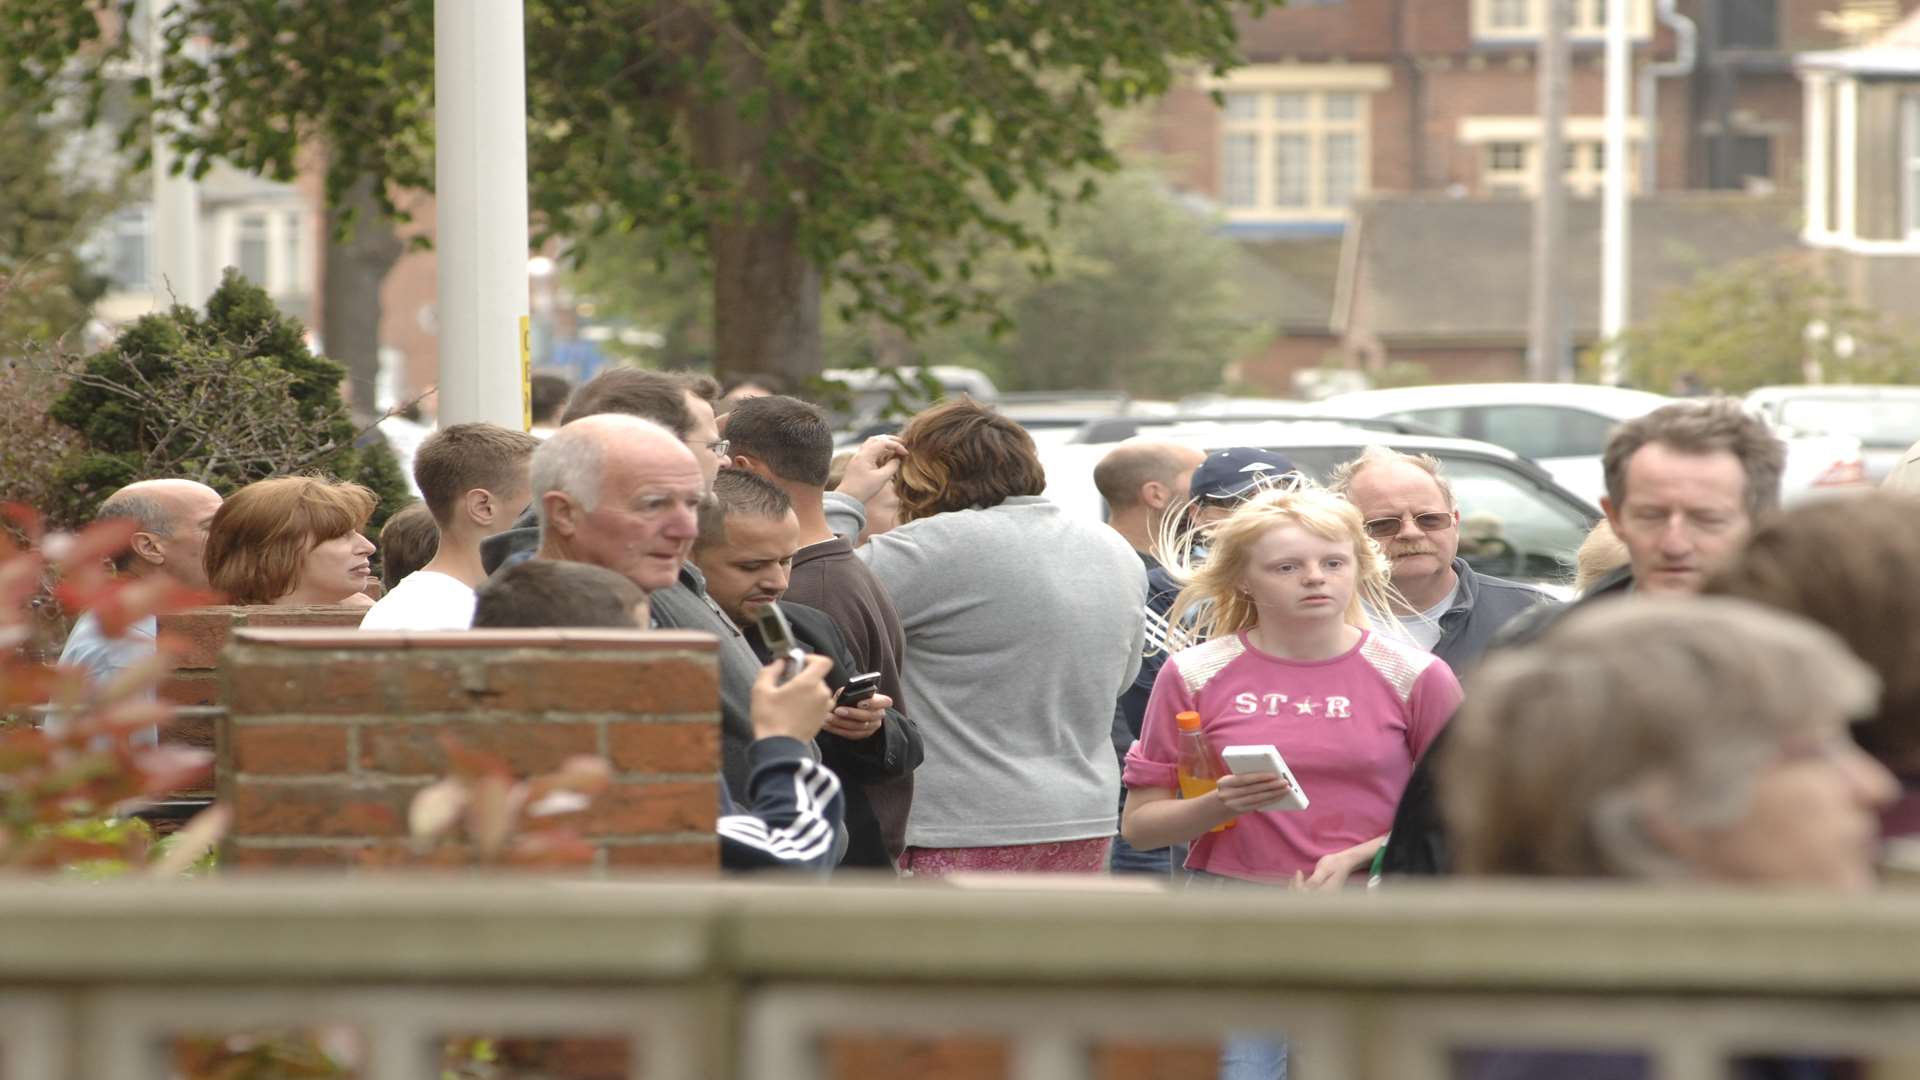 People gathered in the street after their homes shook. Picture: Paul Dennis